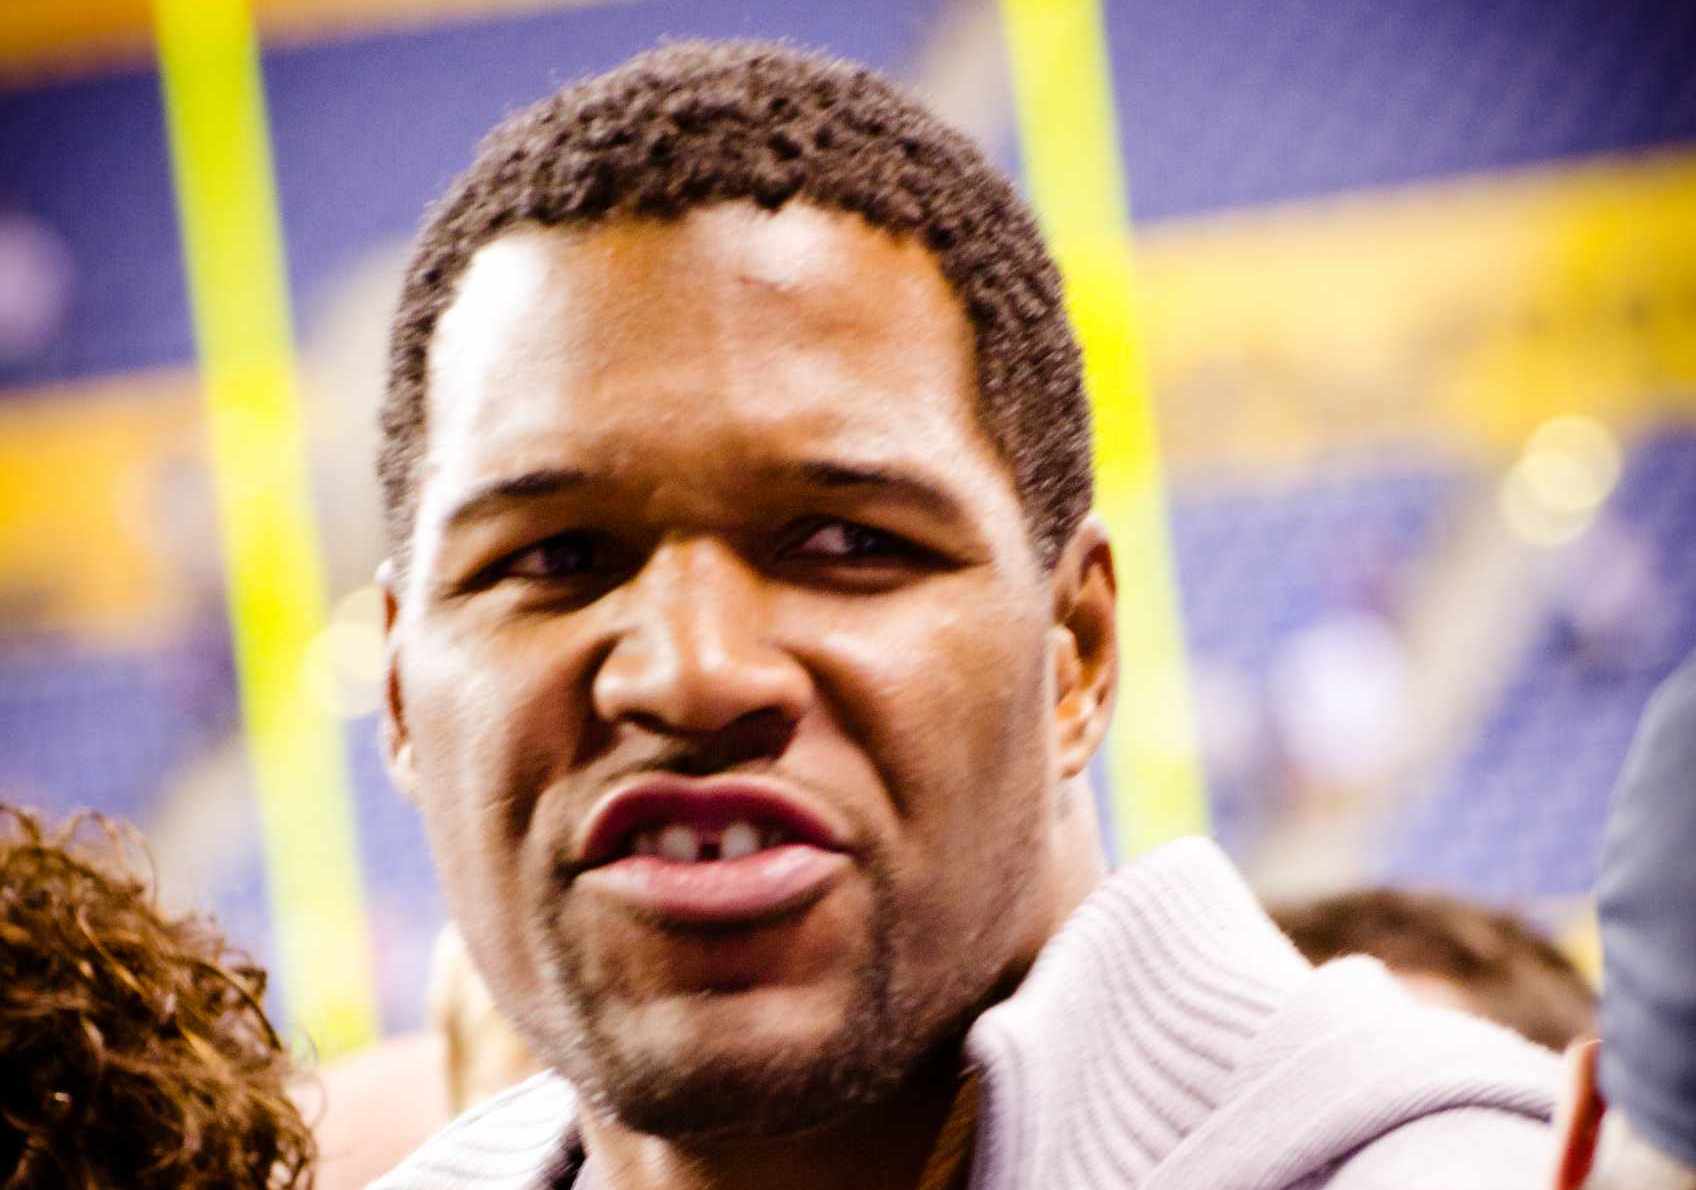 Michael Strahan Tests COVID Positive and Goes Into Isolation